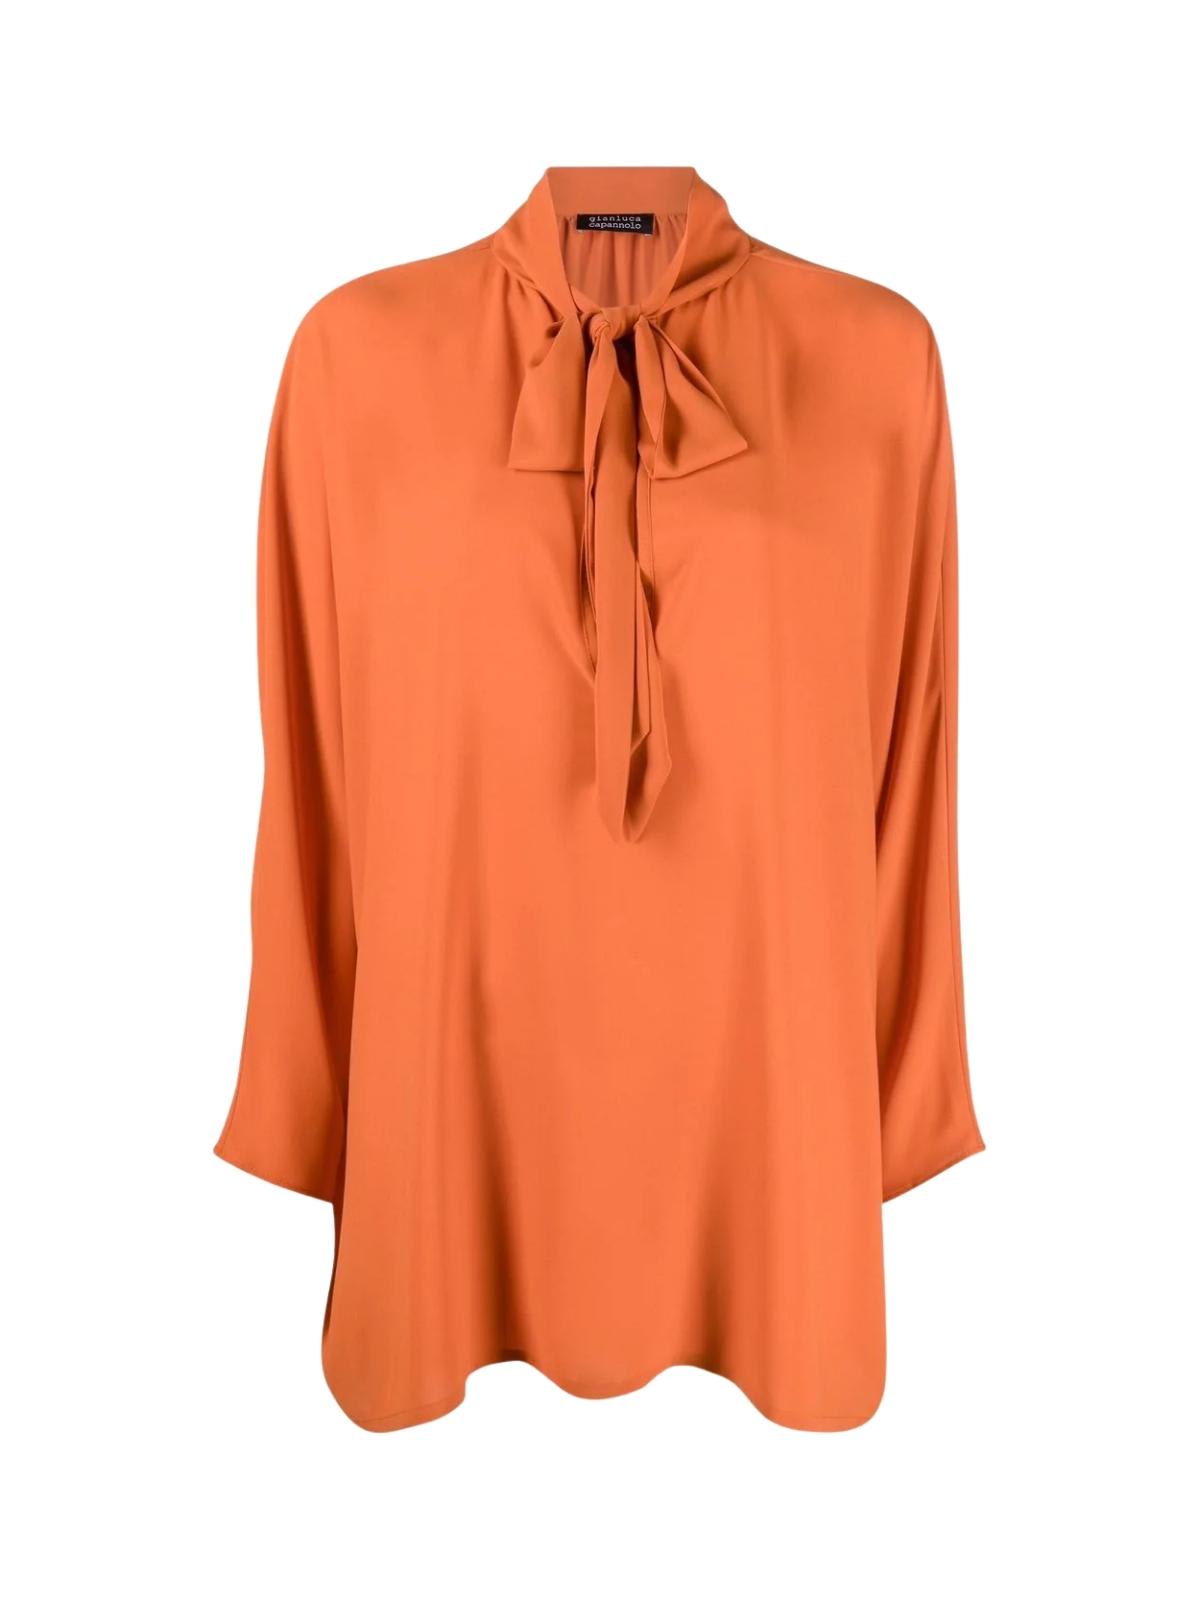 Gianluca Capannolo Endora L/s Shirt With Scarf